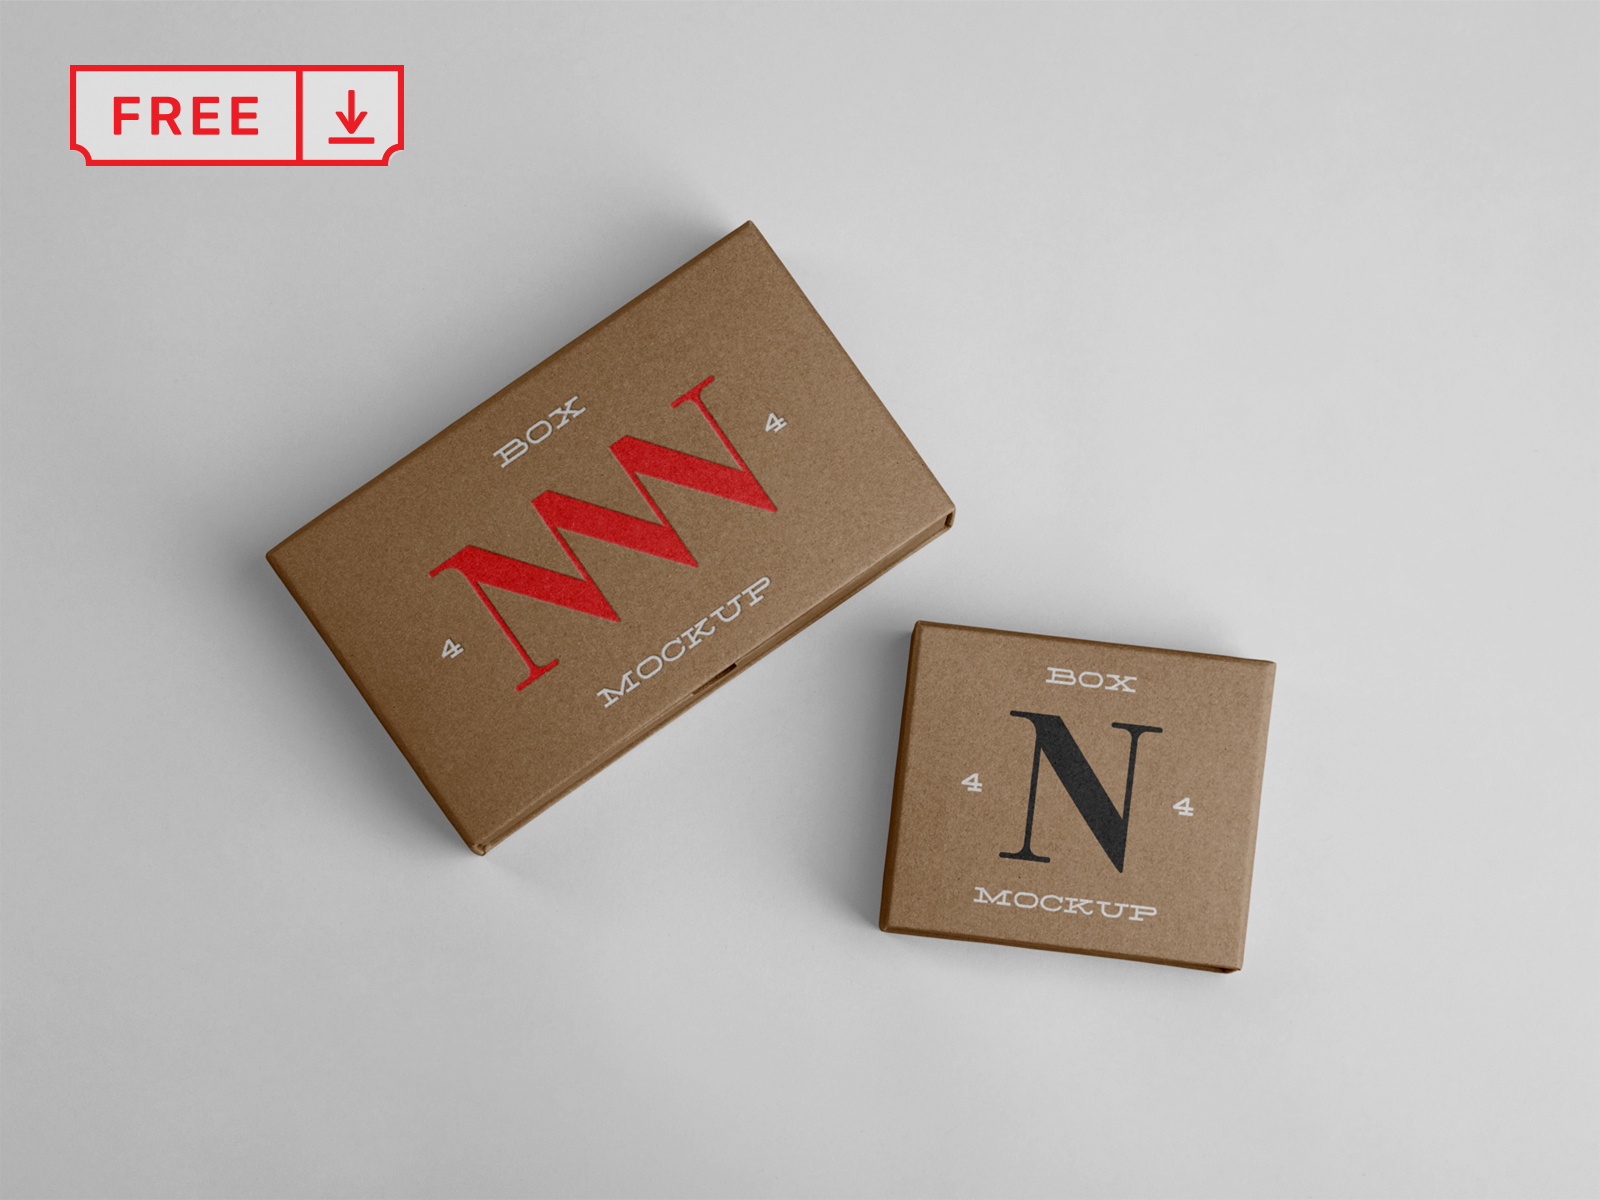 Download Free Paper Box Mockups by Mr.Mockup™ on Dribbble